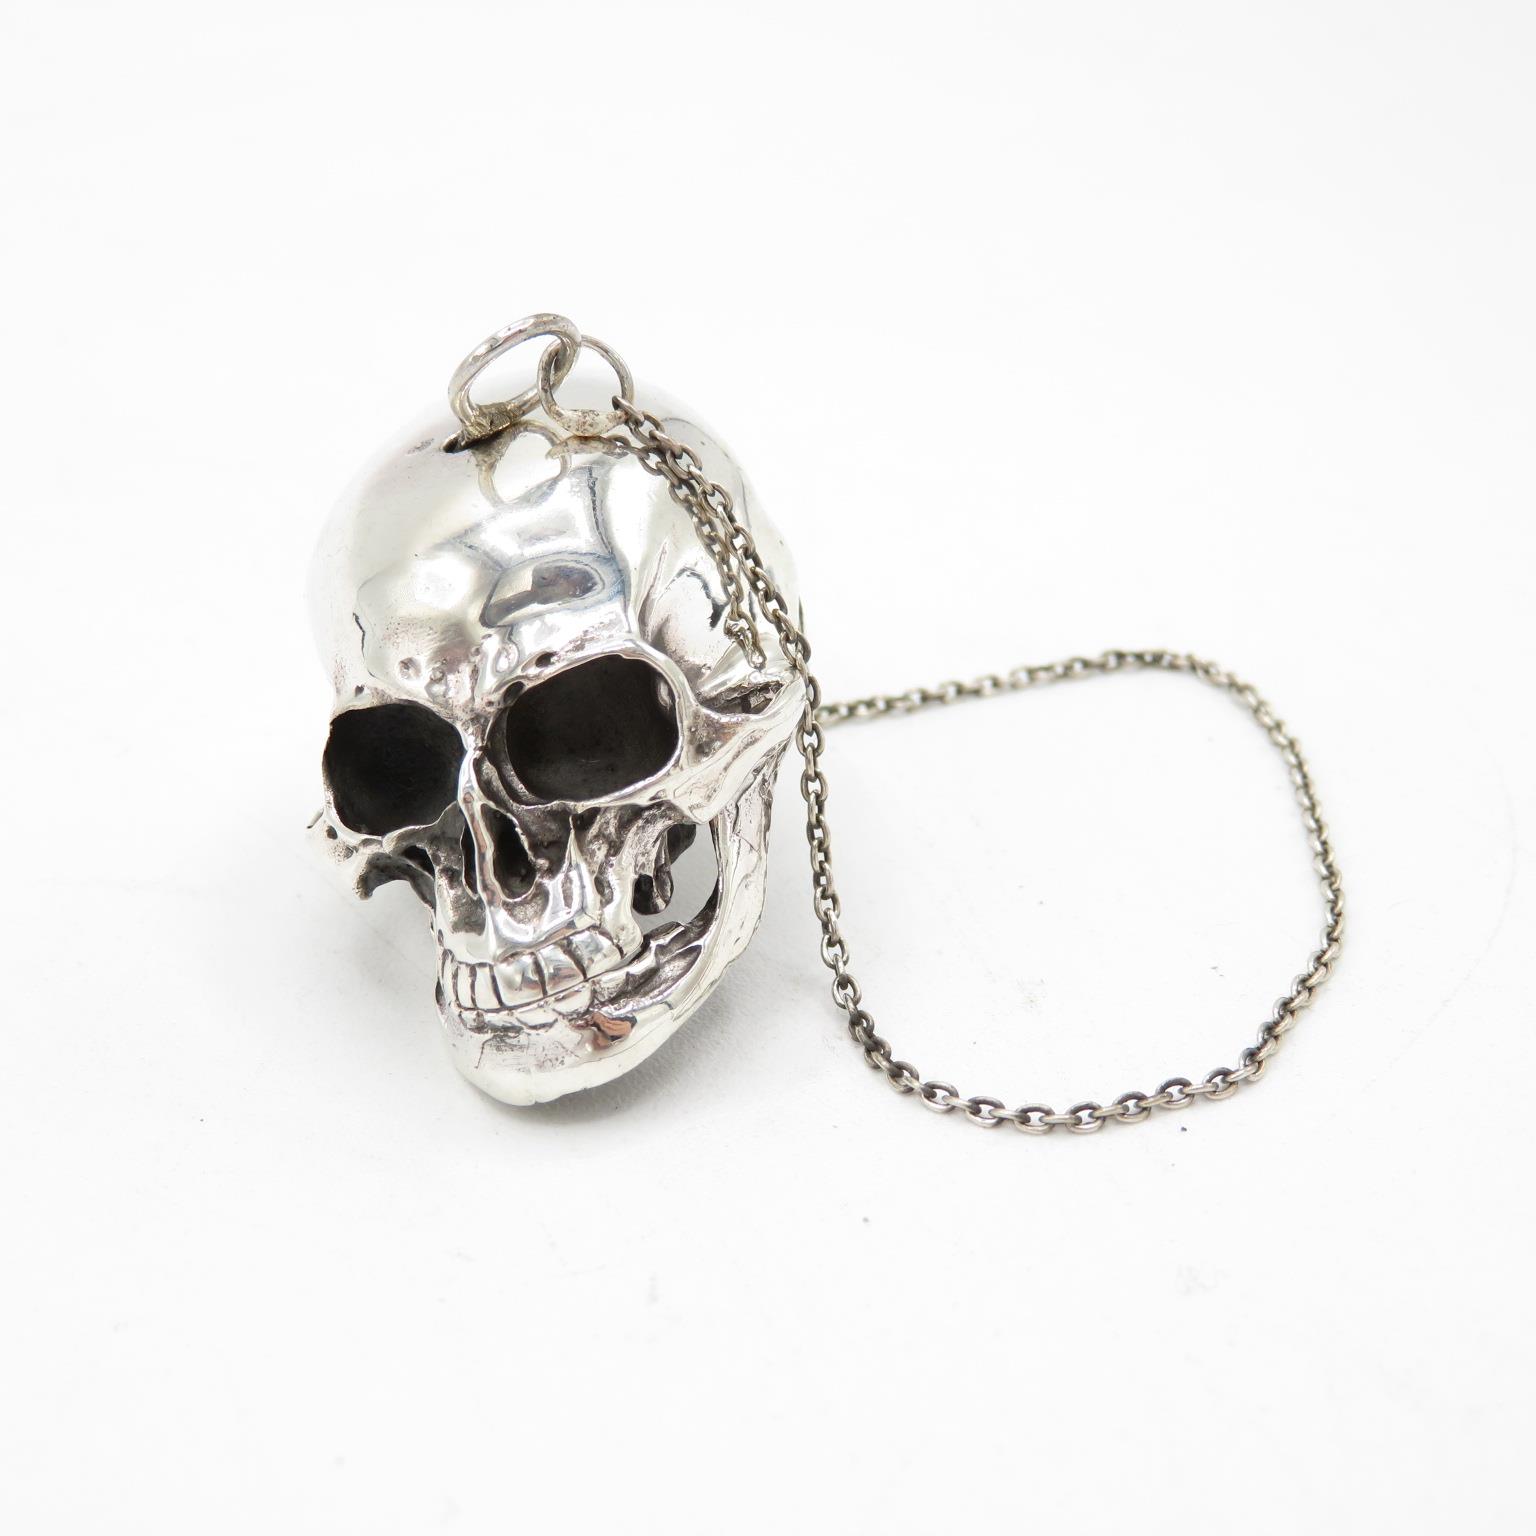 Extremely fine detailed articulated Memento Mori human skull in sterling silver with hinged bottom